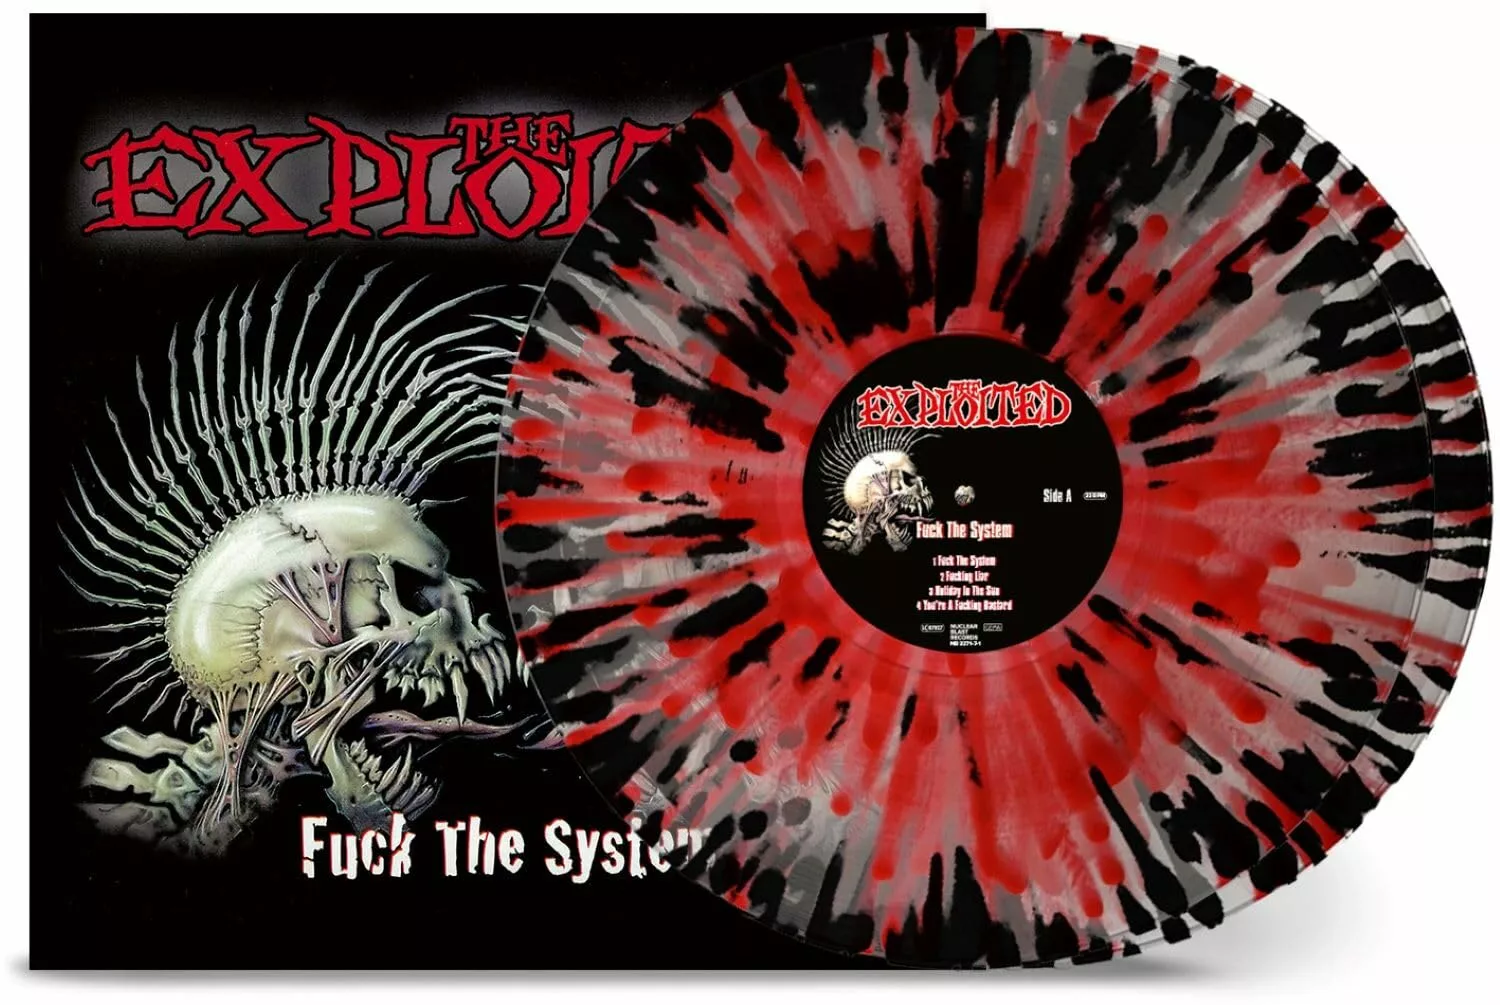 THE EXPLOITED - Fuck The System [CLEAR/RED/BLACK SPLATTER DLP]